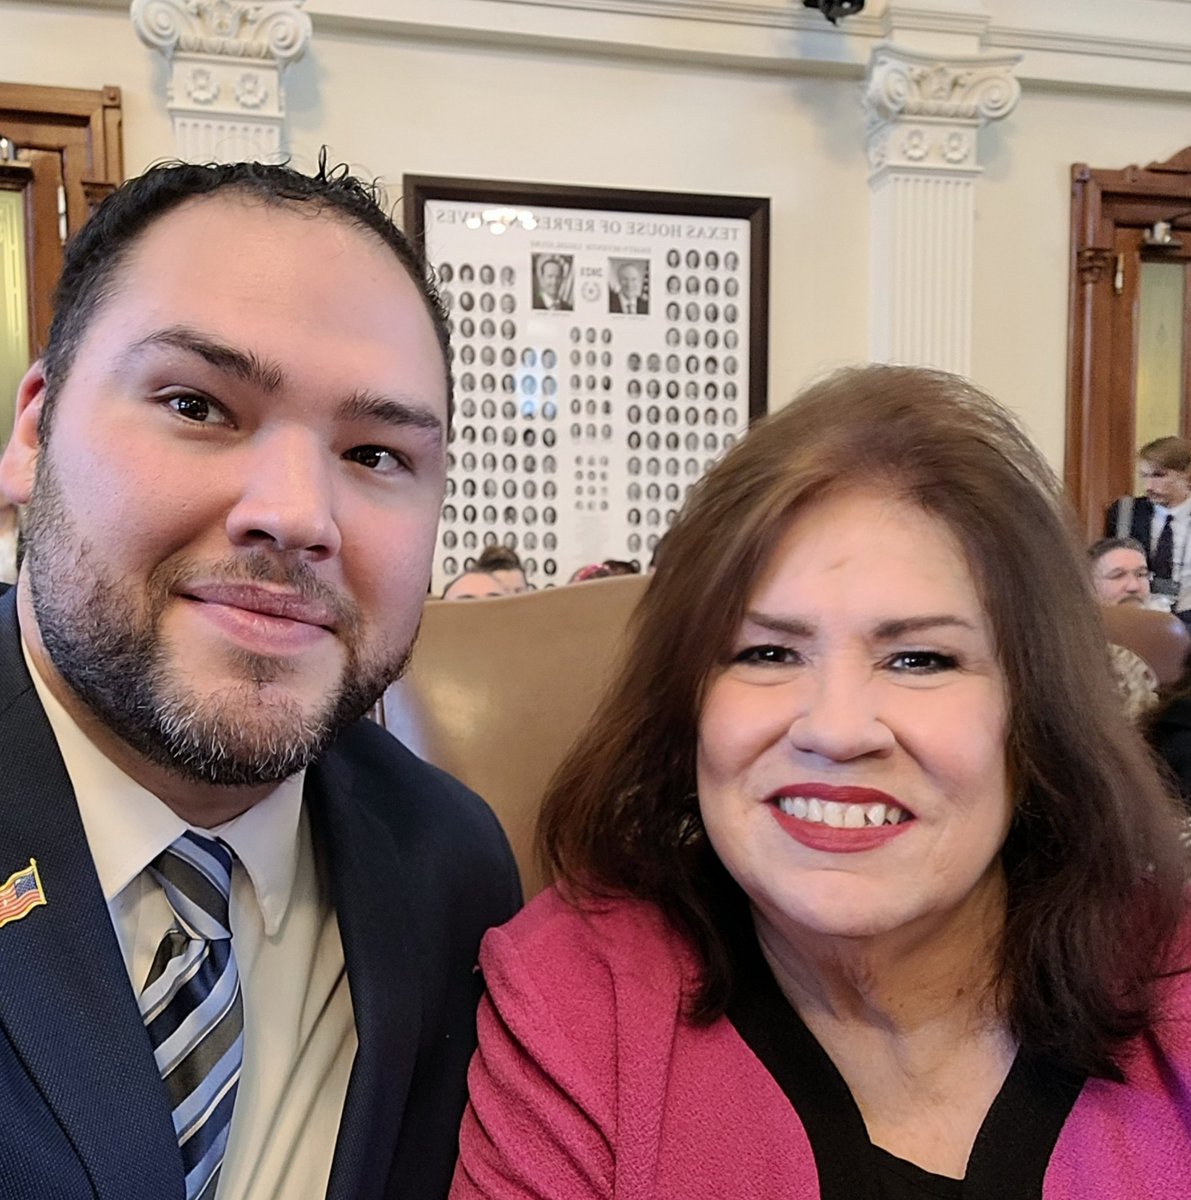 On the House floor with @GabeRivas and ready to take the oath of office for my 3rd term serving #IrvingTX in the #txlege. Thank you to the people of #HD105 for the continued honor of serving our community!